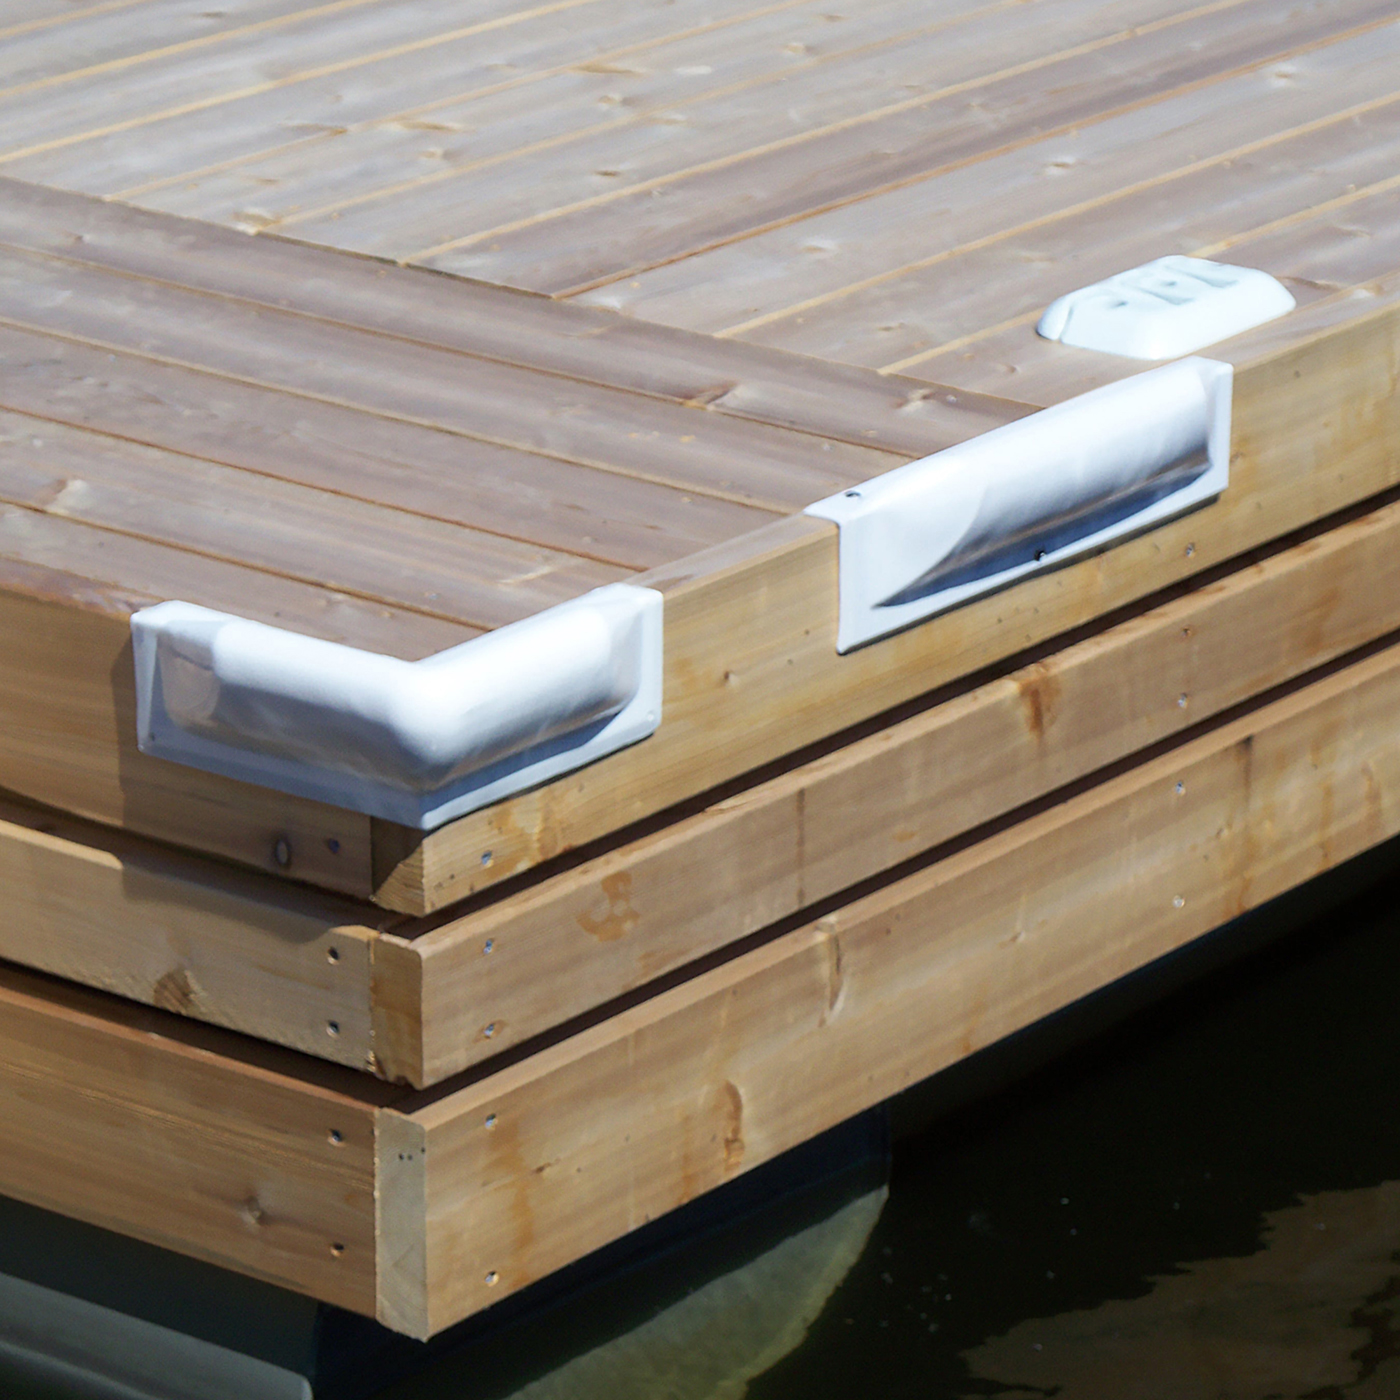 Overton's Shopper's Guide for Dock Edging and Bumpers - Overton's